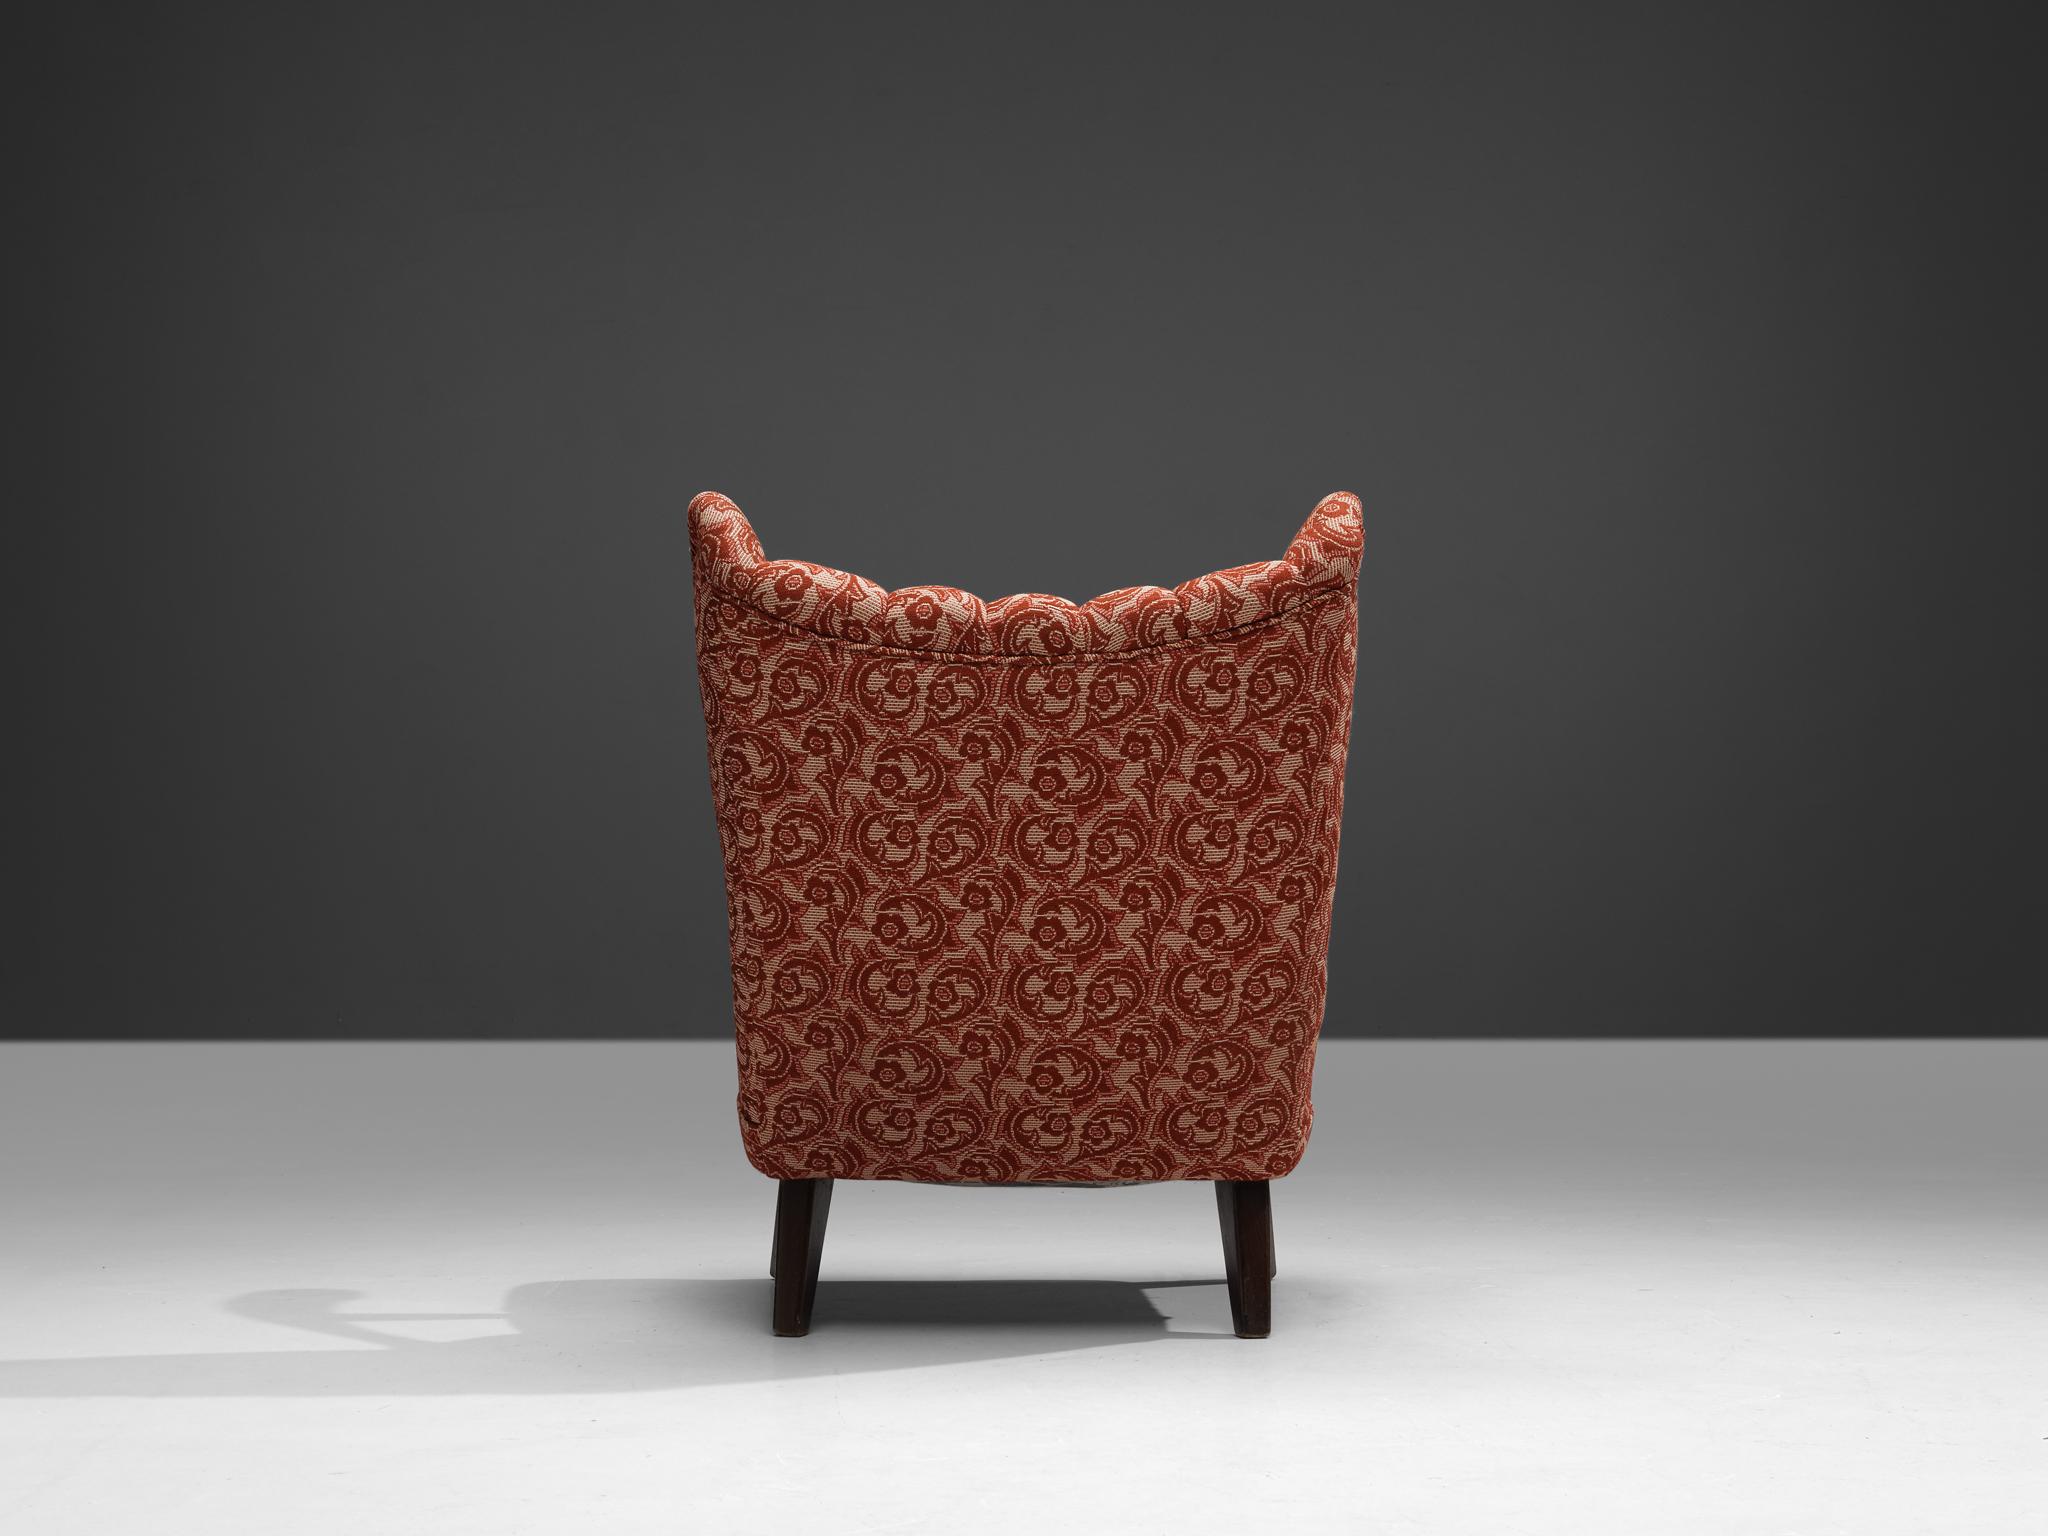 Sculpted Lounge Chair in Walnut and Red Floral Upholstery For Sale 1